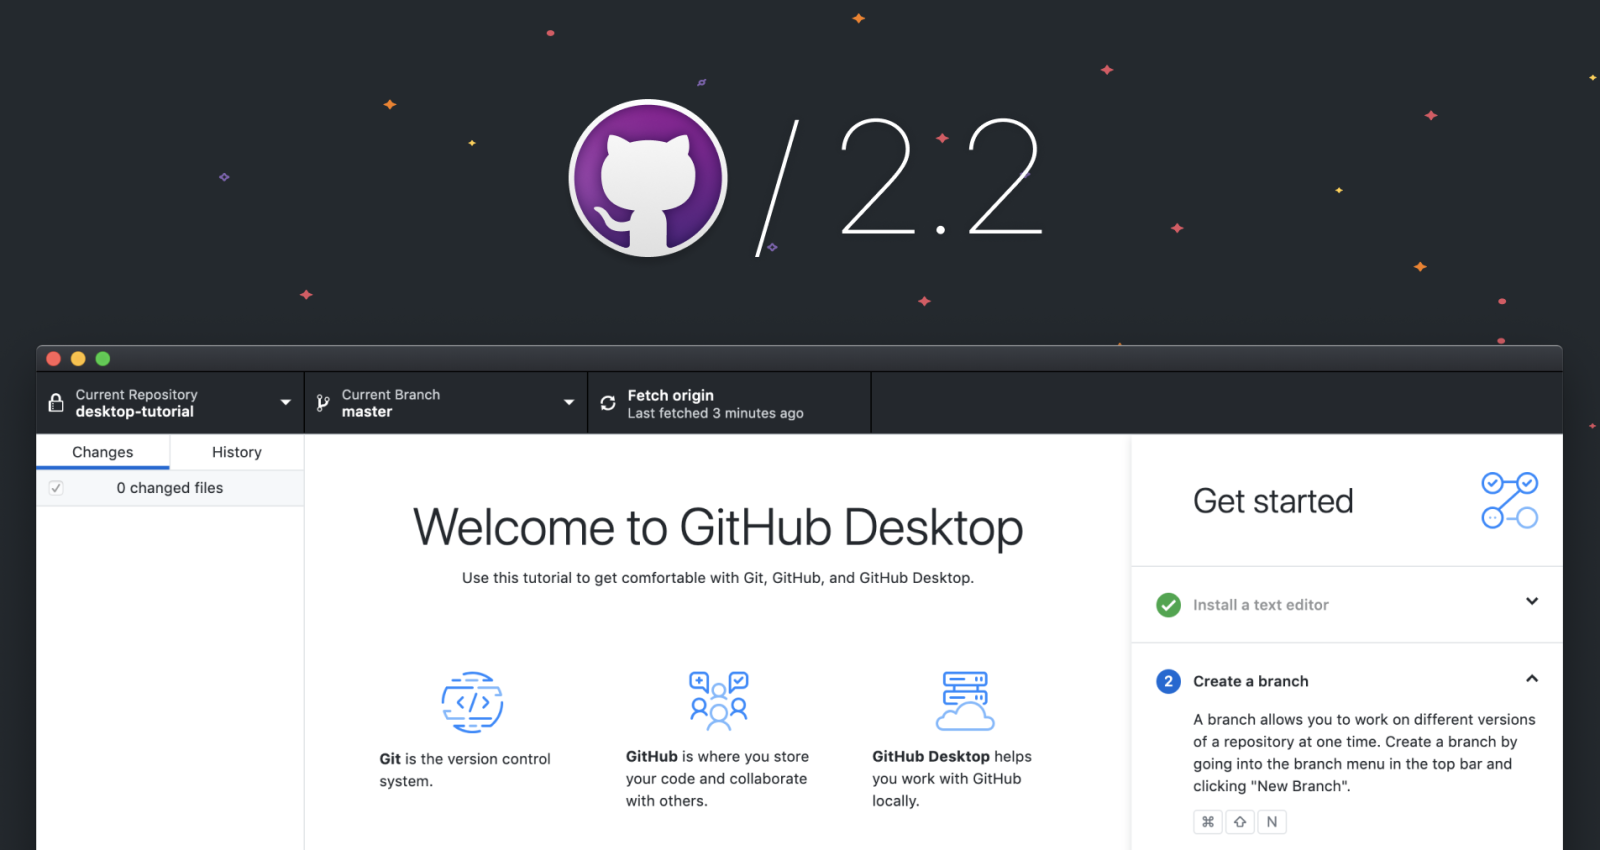 Getting started with Git and GitHub is easier than ever with GitHub Desktop 2.2